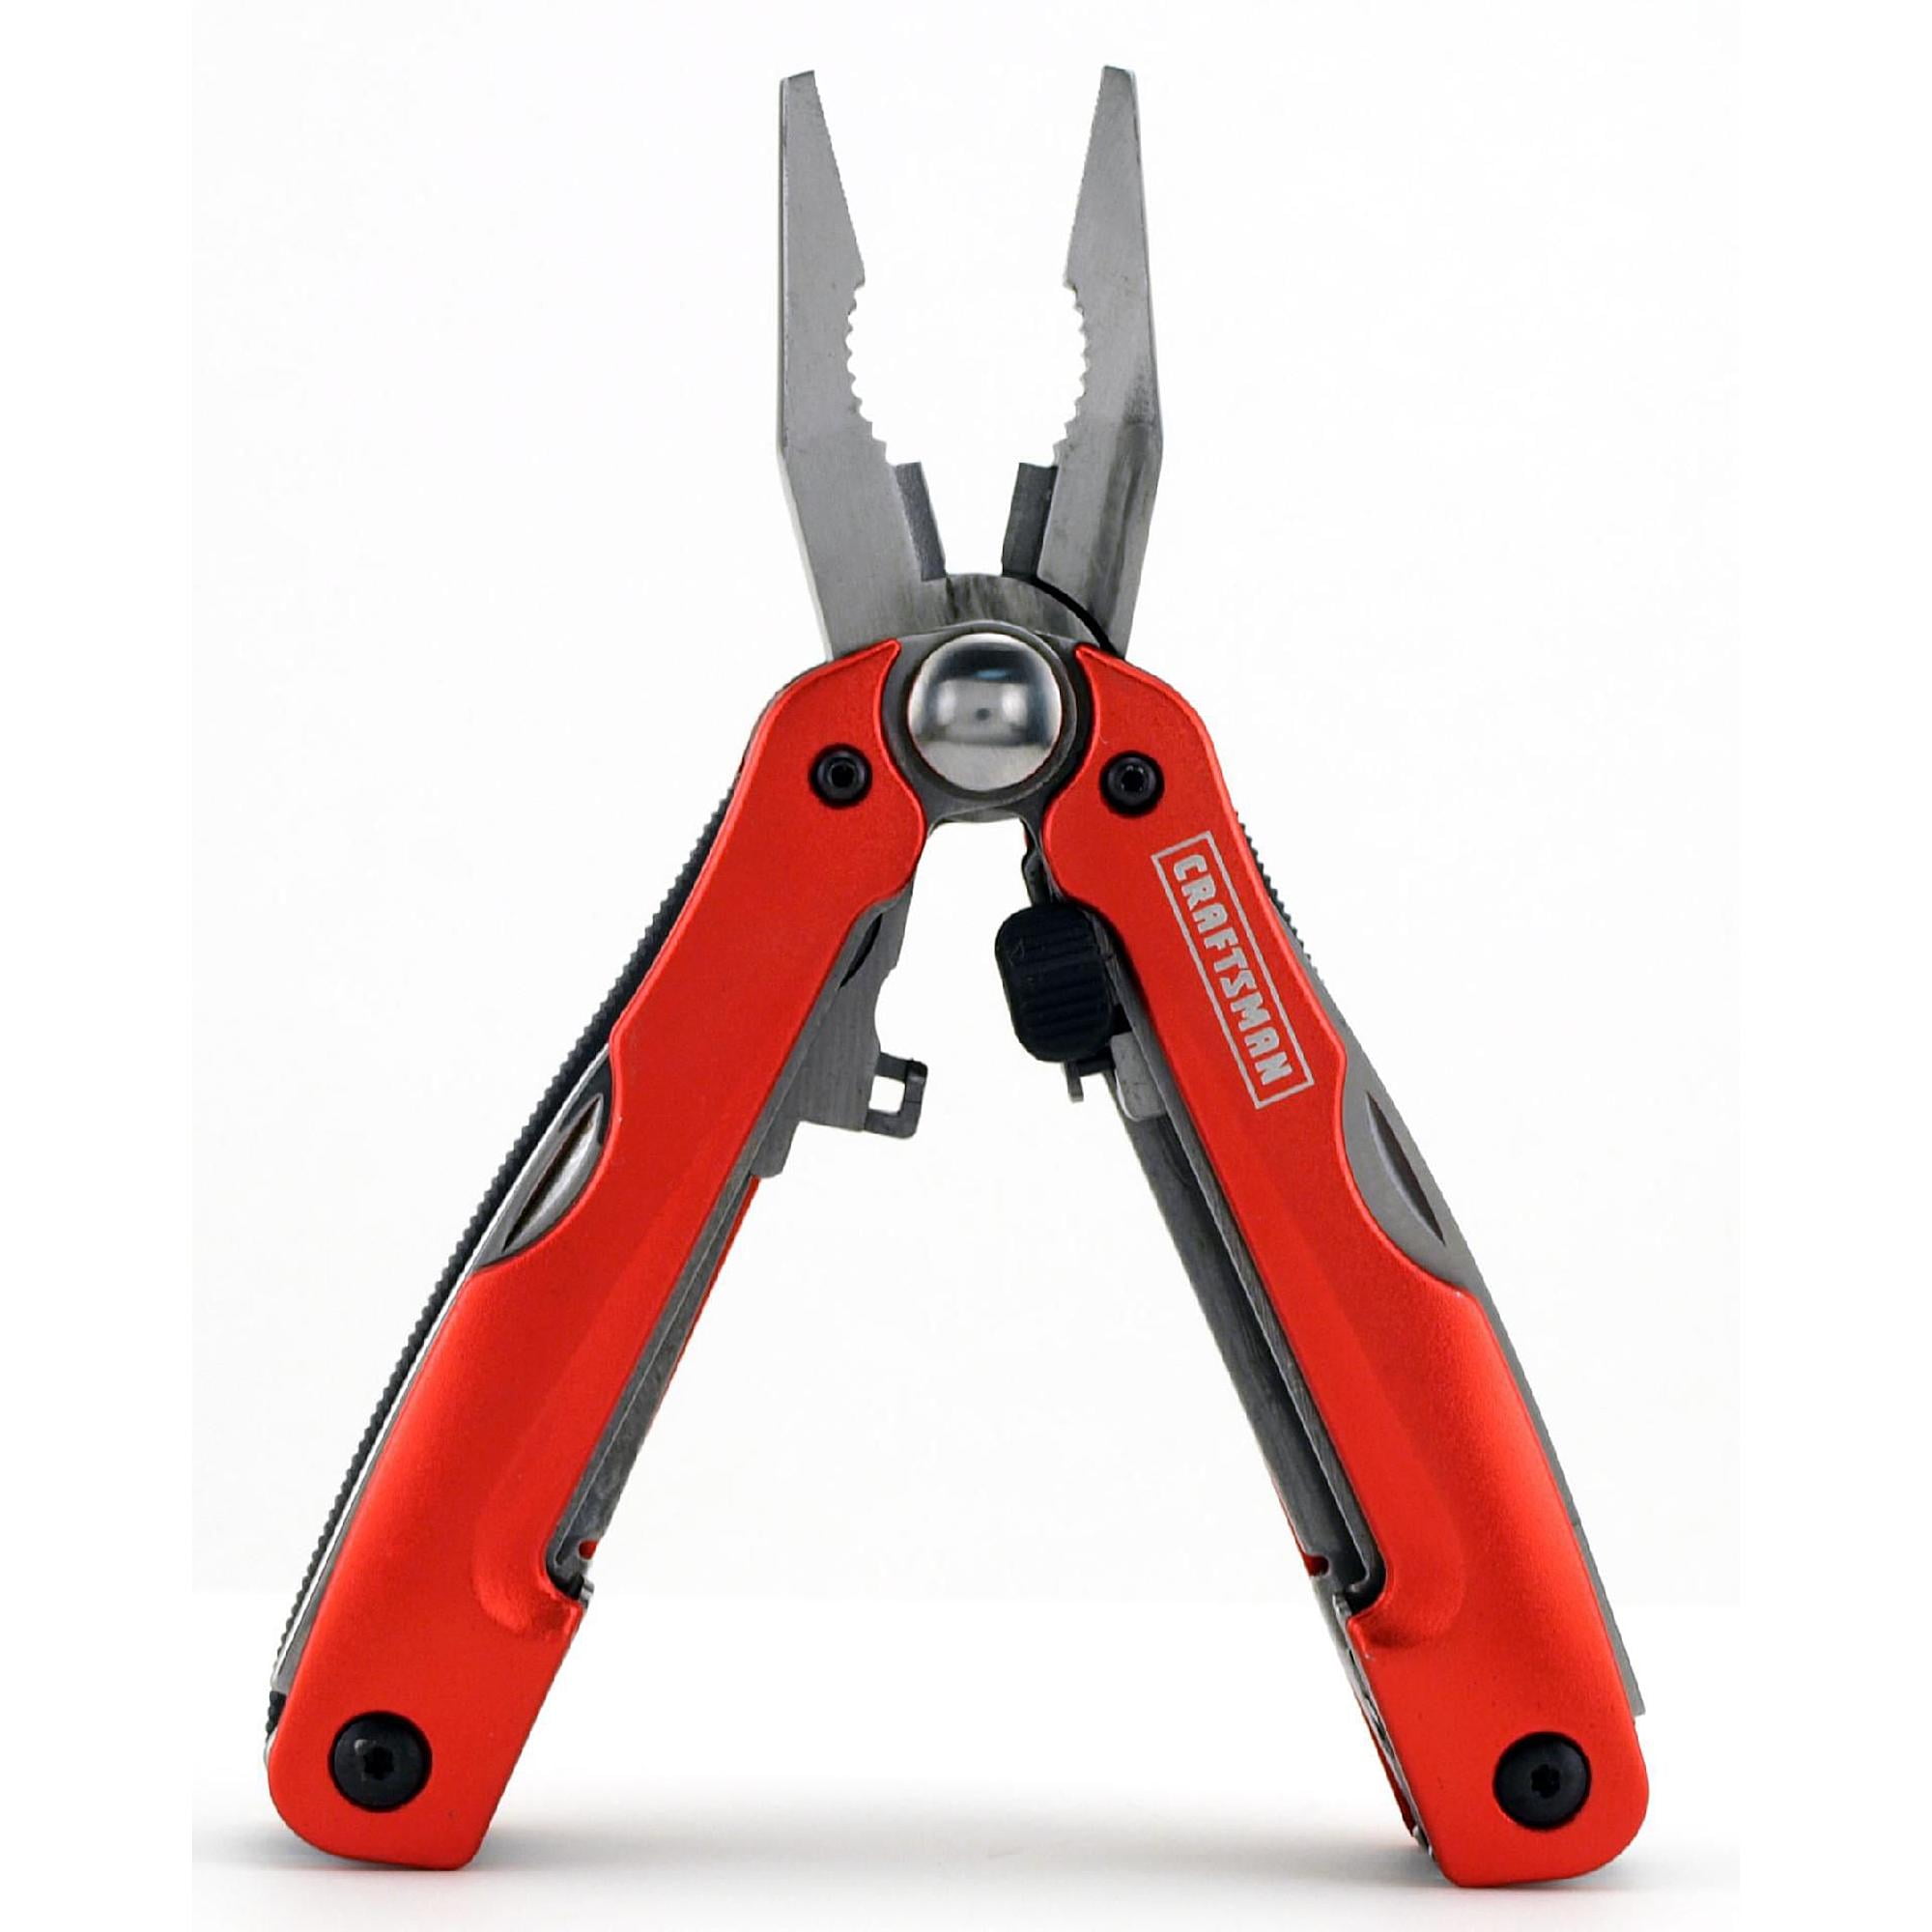 Craftsman Multi Tool Replacement Parts | Reviewmotors.co